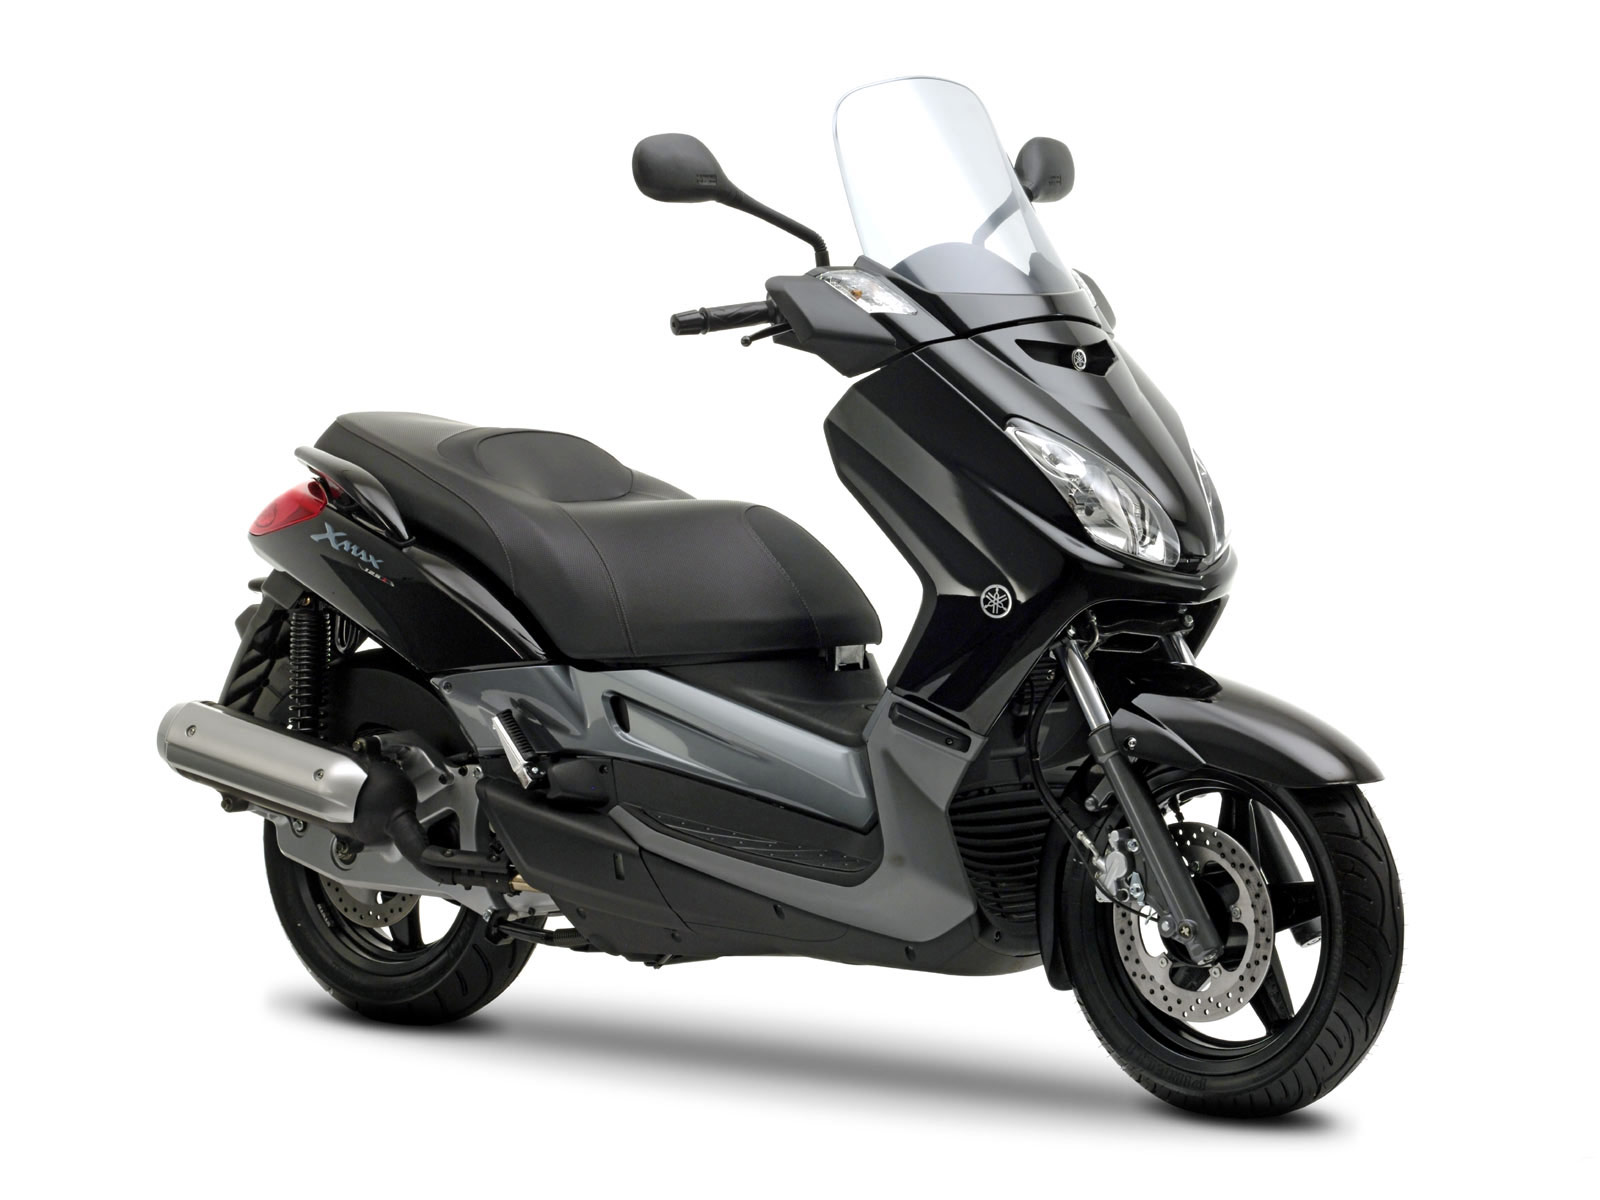 2008 YAMAHA XMax 125 pictures, specifications